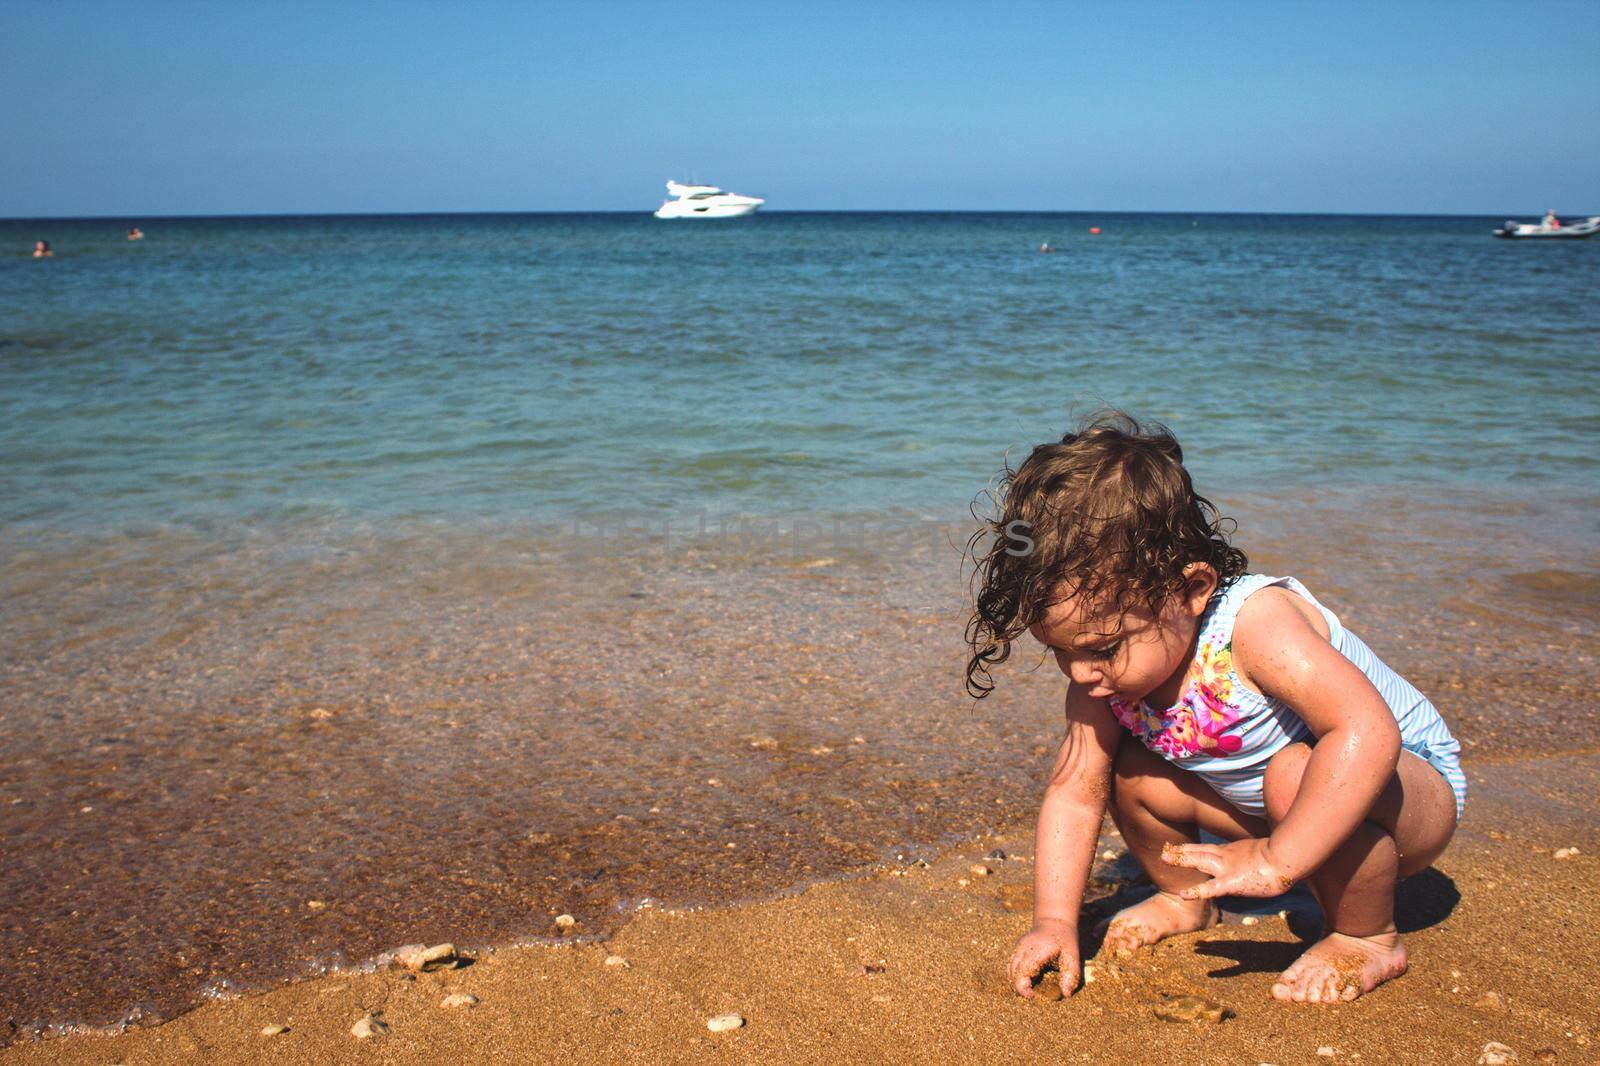 Little girl playing on a sandy beach by the sea